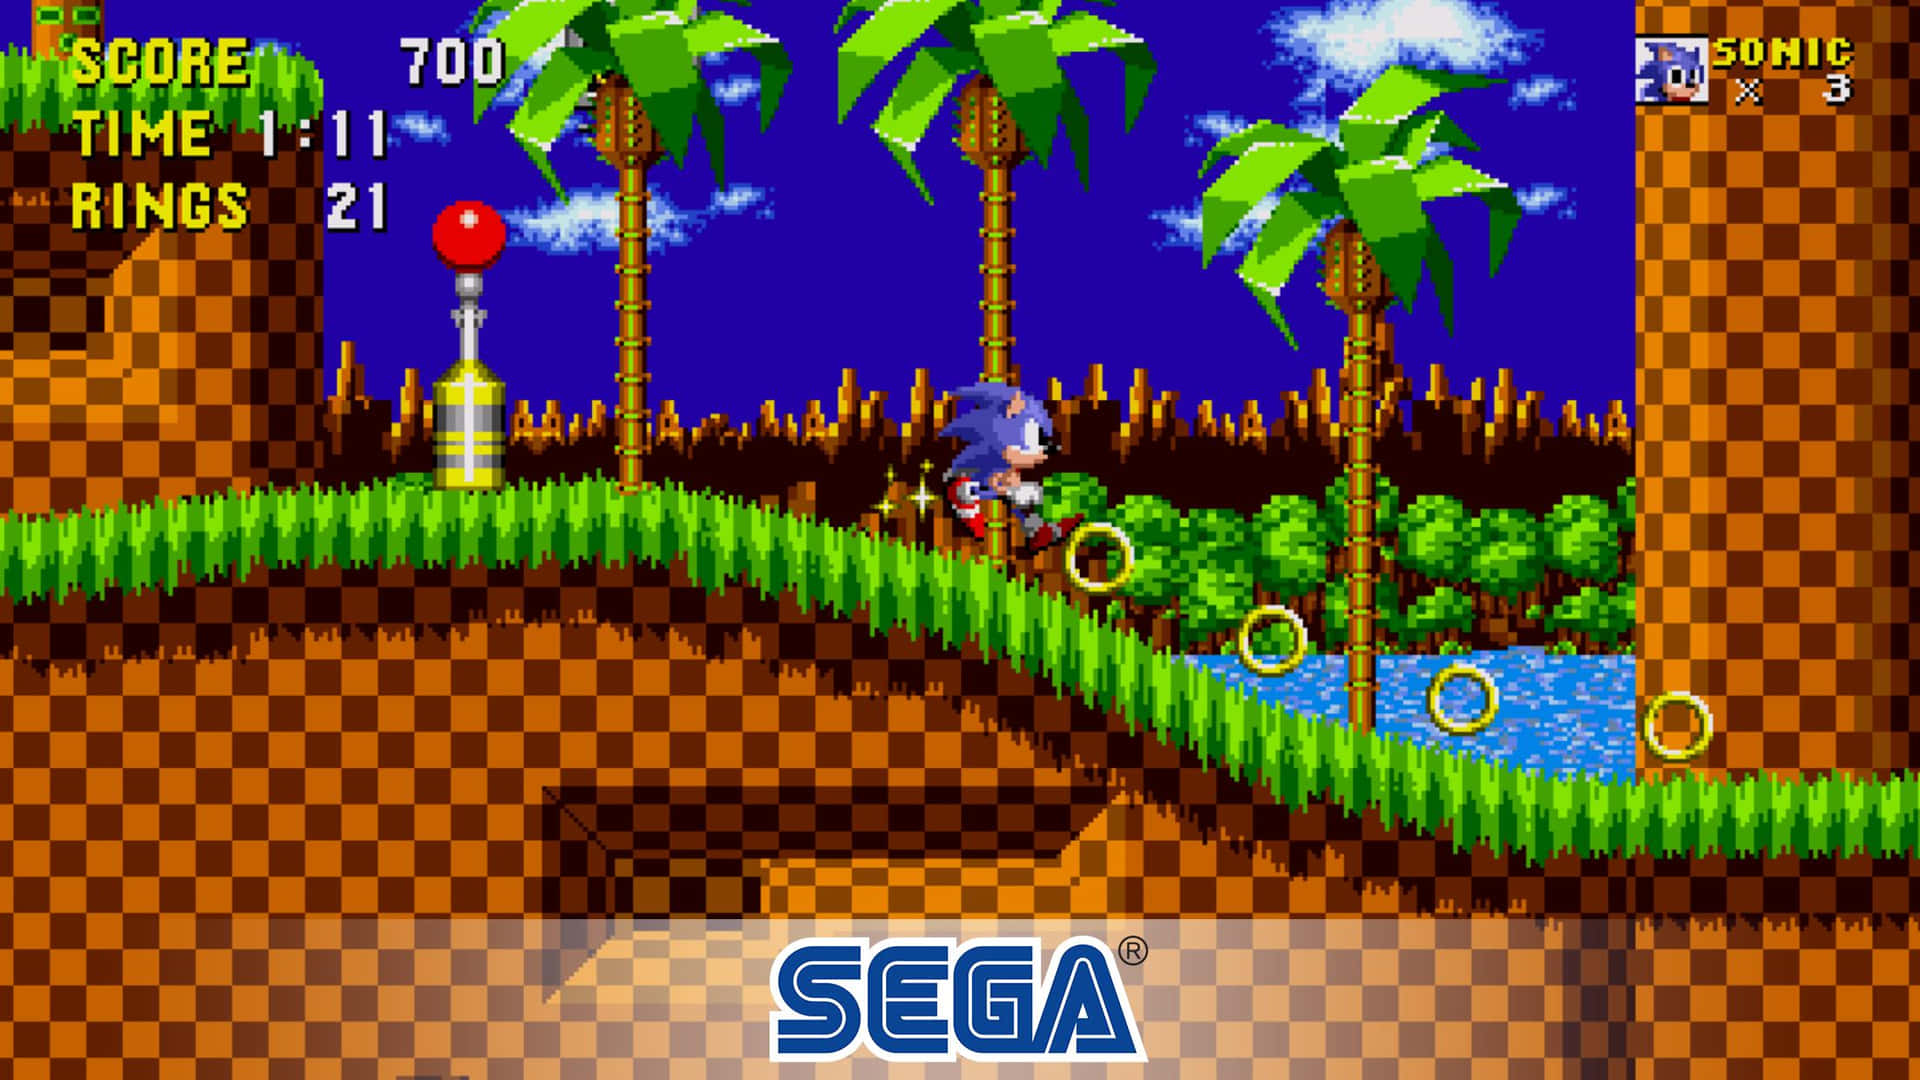 "The legendary Sonic, leaping with speed and agility."